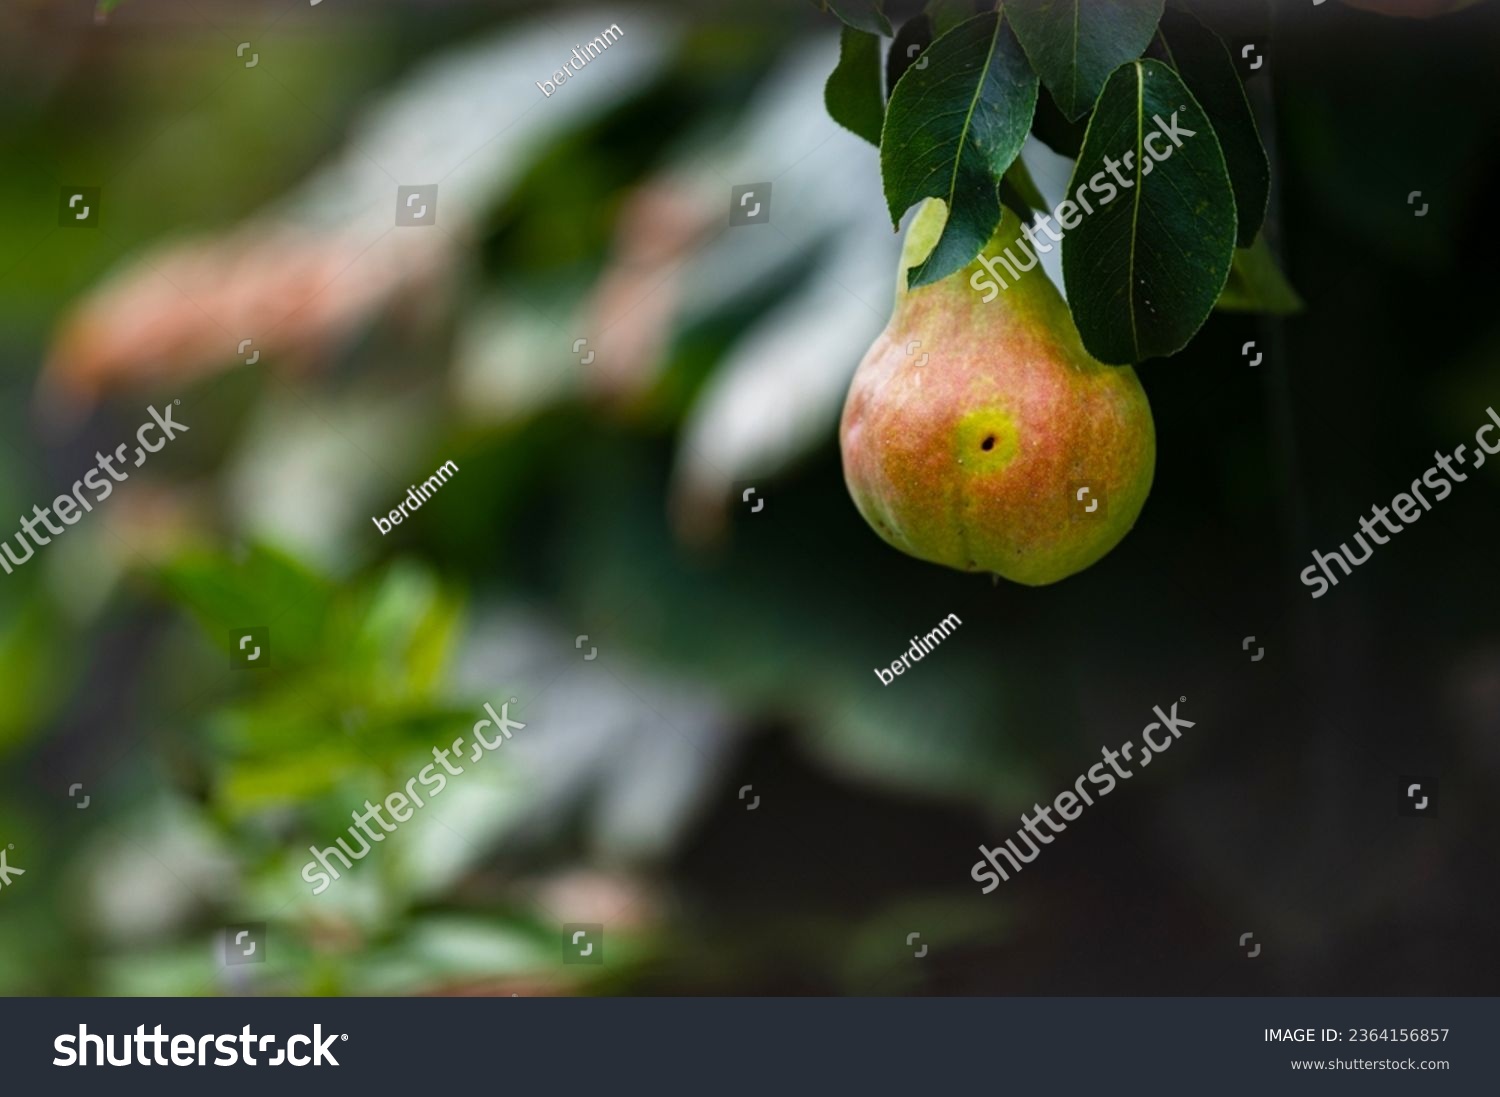 ripe juicy pear is hanging on branch in the garden. fruit is wormy, characteristic trace is visible on the side. In the background, blurred greenery of garden. concept of harvest and healthy nutrition #2364156857